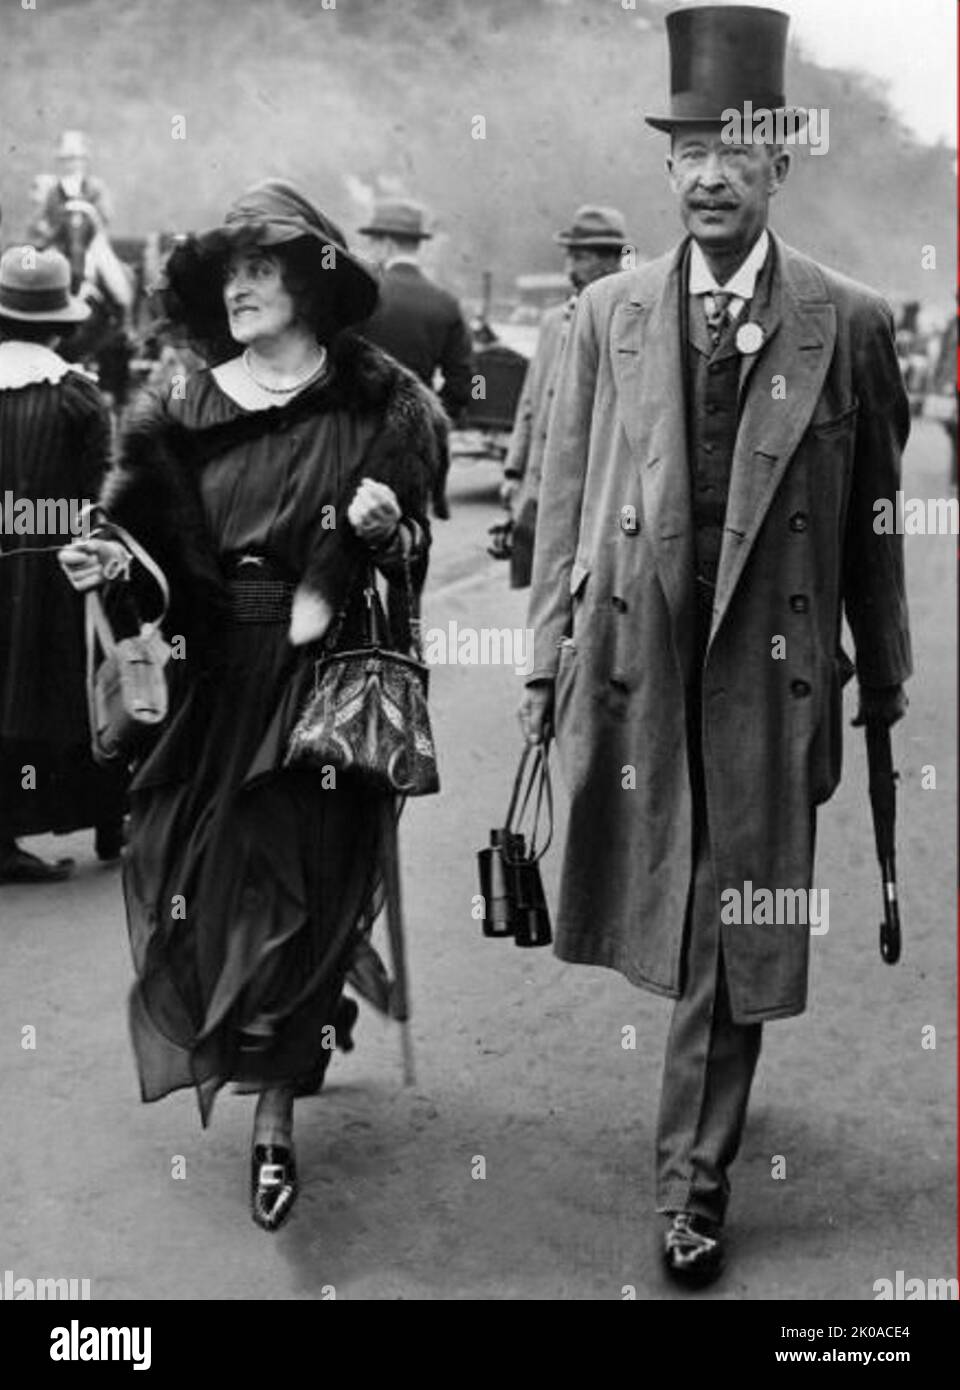 Lord and Lady Carnarvon. George Edward Stanhope Molyneux Herbert, 5th Earl of Carnarvon, DL (26 June 1866 - 5 April 1923), styled Lord Porchester until 1890, was an English peer and aristocrat best known as the financial backer of the search for and excavation of Tutankhamun's tomb in the Valley of the Kings Stock Photo